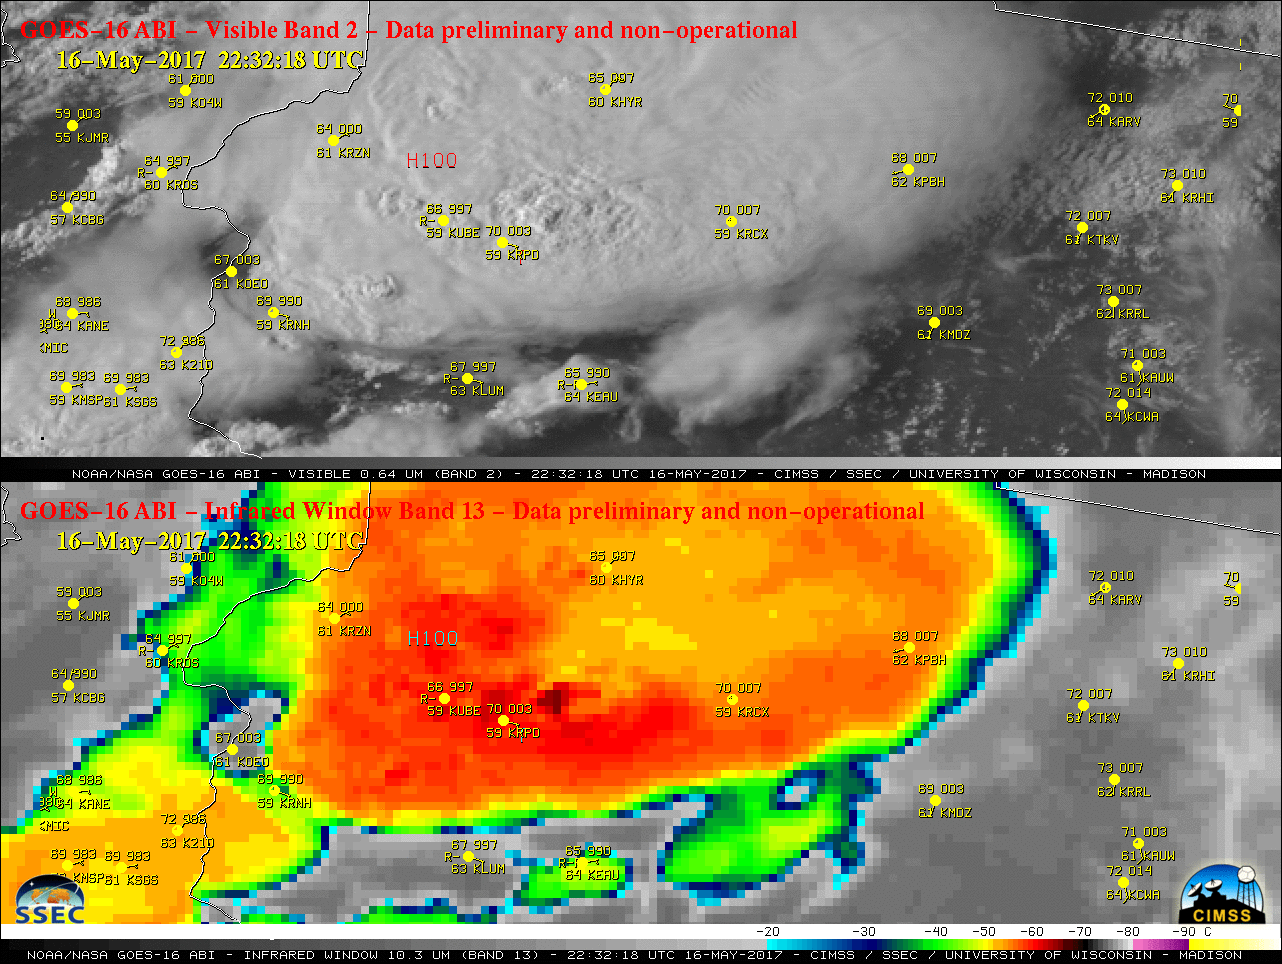 GOES-16 Visible (0.64 µm, top) and Infrared Window (10.3 µm, bottom) images, with plots of SPC storm reports and hourly surface reports [click to play animation]